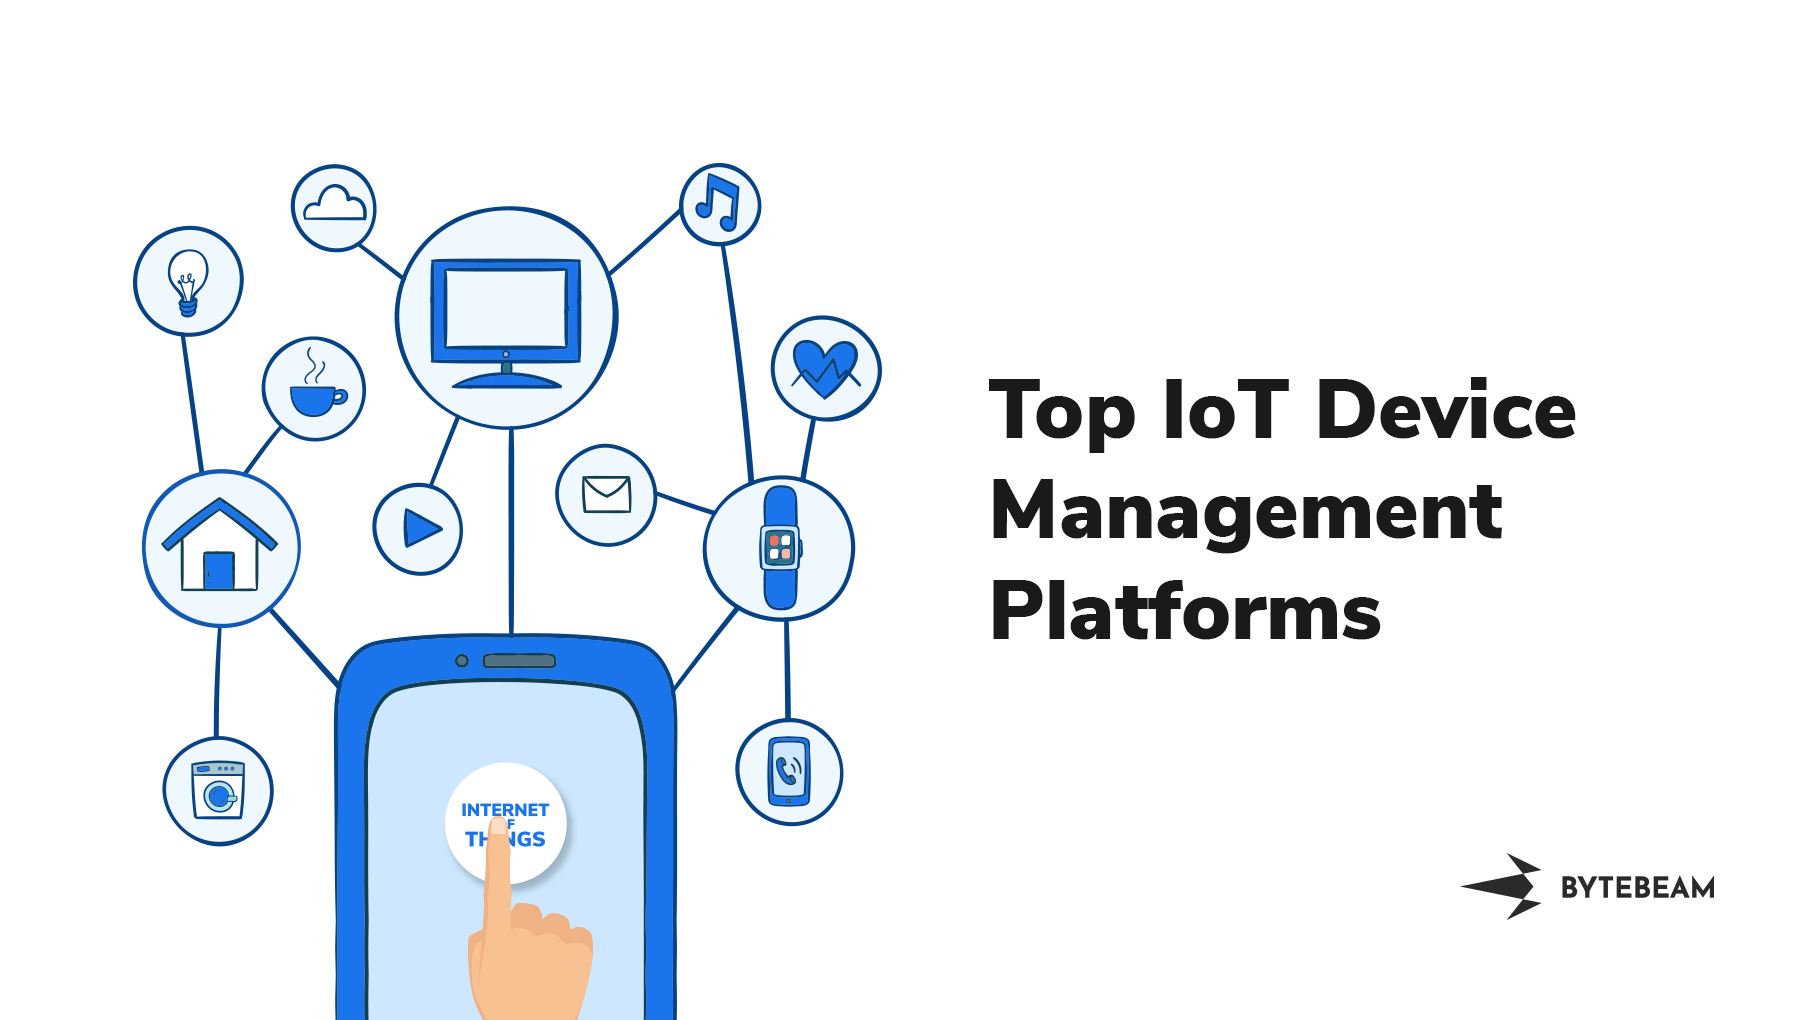 Manage different application with Top Iot device management platforms